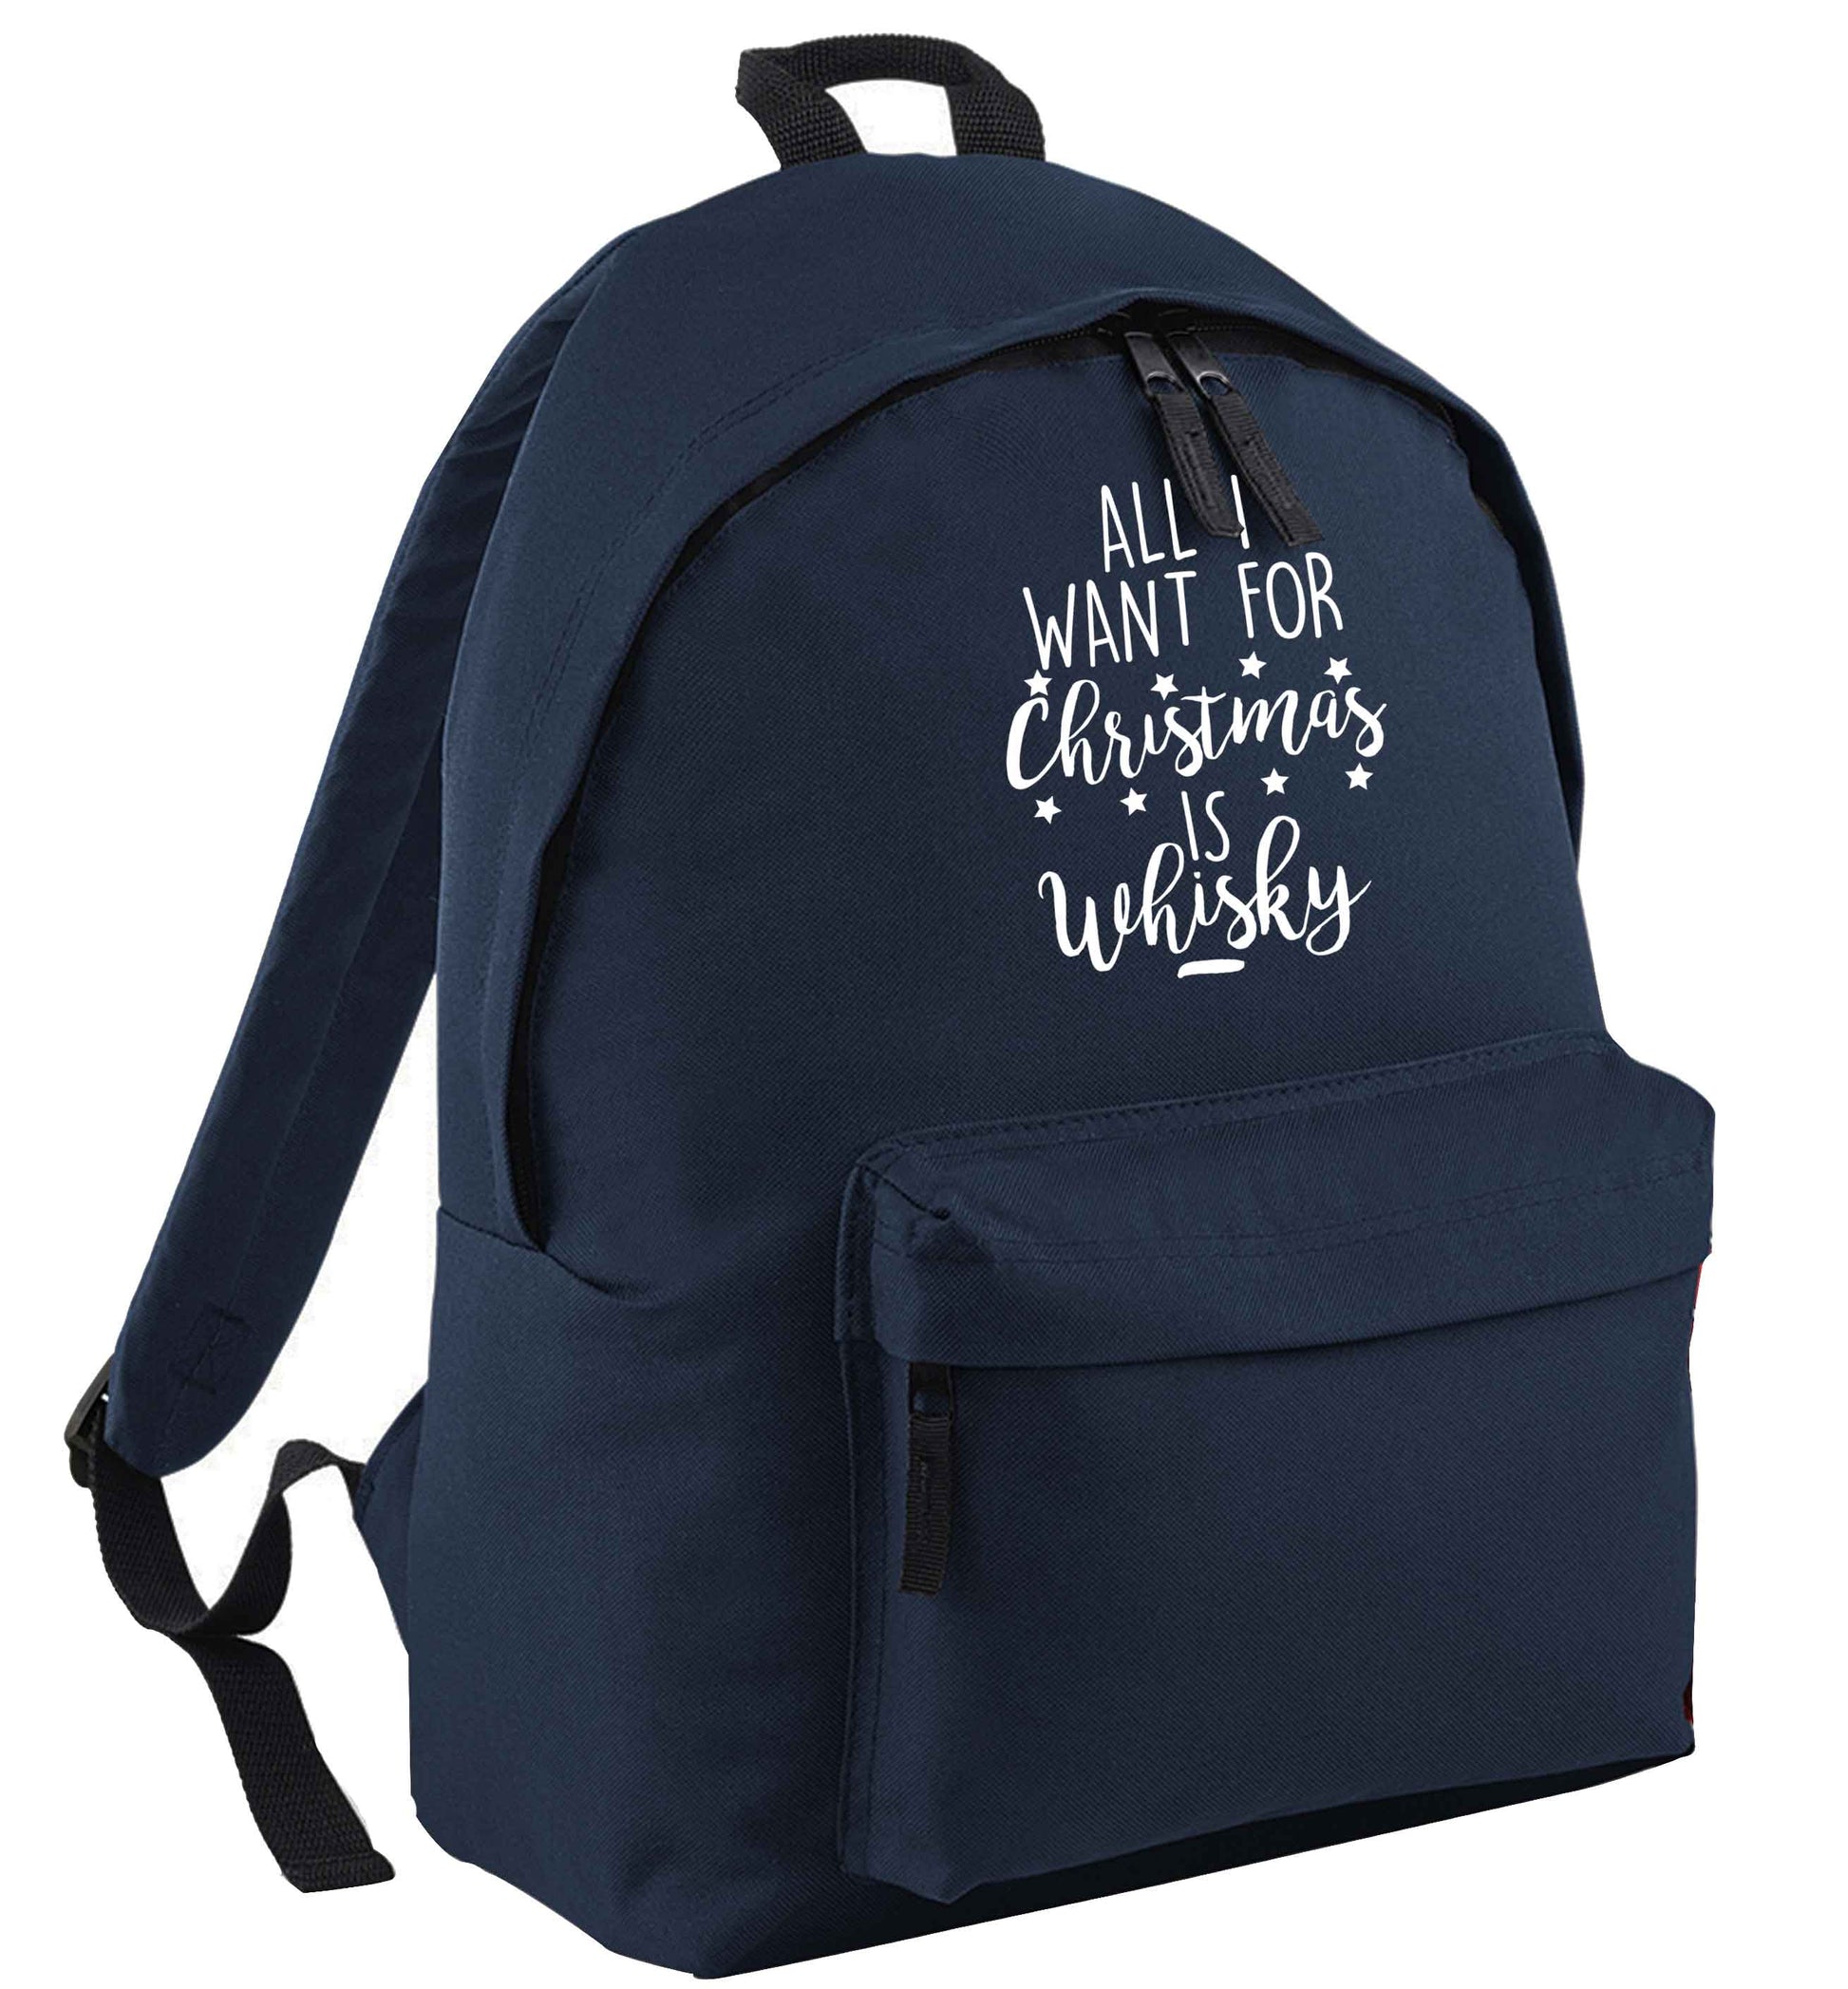 All I want for Christmas is whisky navy adults backpack